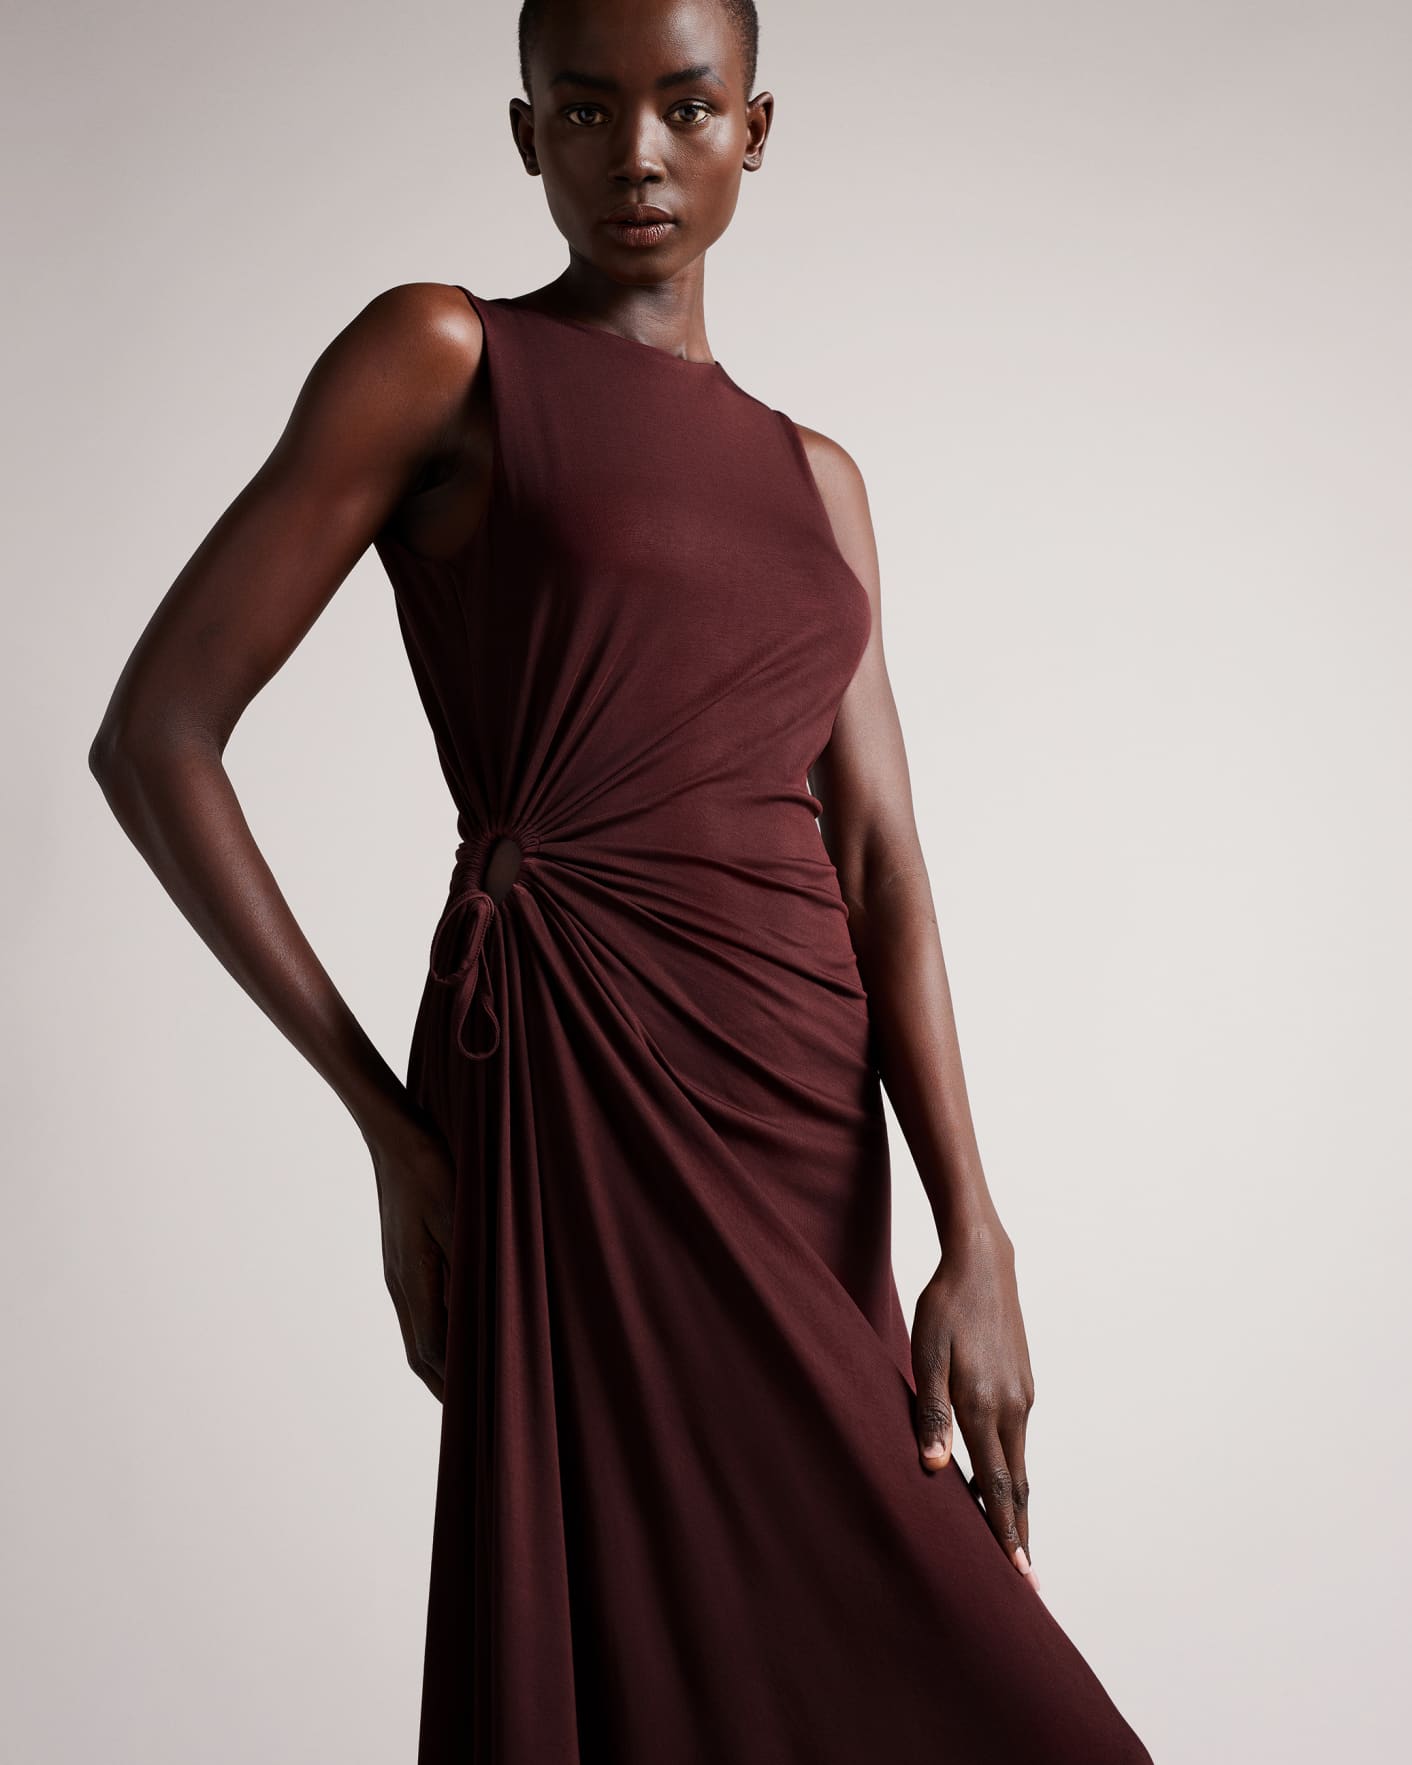 Brown Jersey Dress With Ruched Circle Cut Out Ted Baker